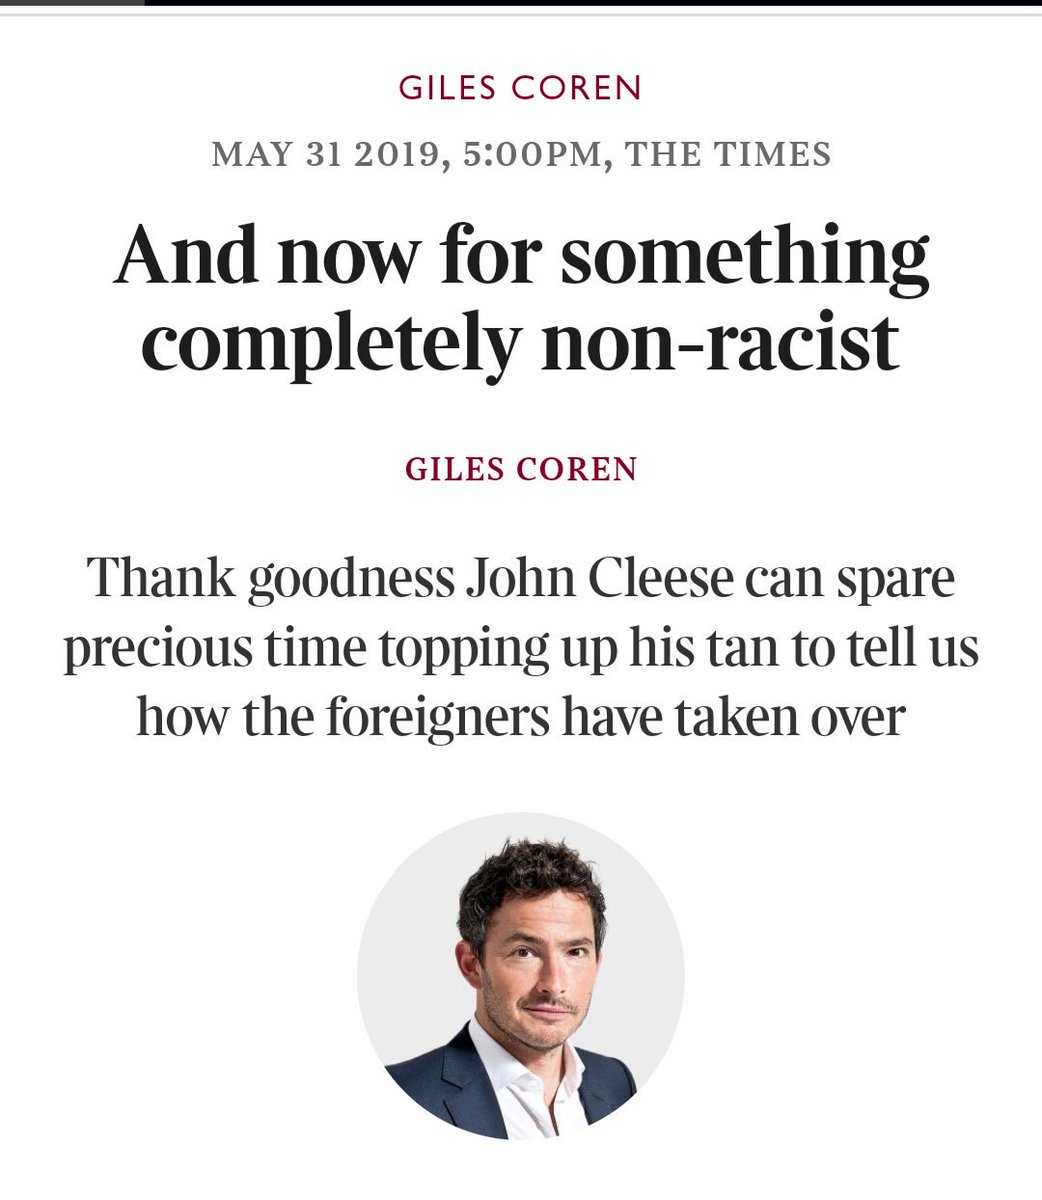 Hooray! Giles Coren has decided to become an anti-racism warrior. Thanks for your piece in response to John Cleese's obviously racist, xenophobic, far right tweet. What would minority groups do without you to defend us, our great champion? (Thread...)